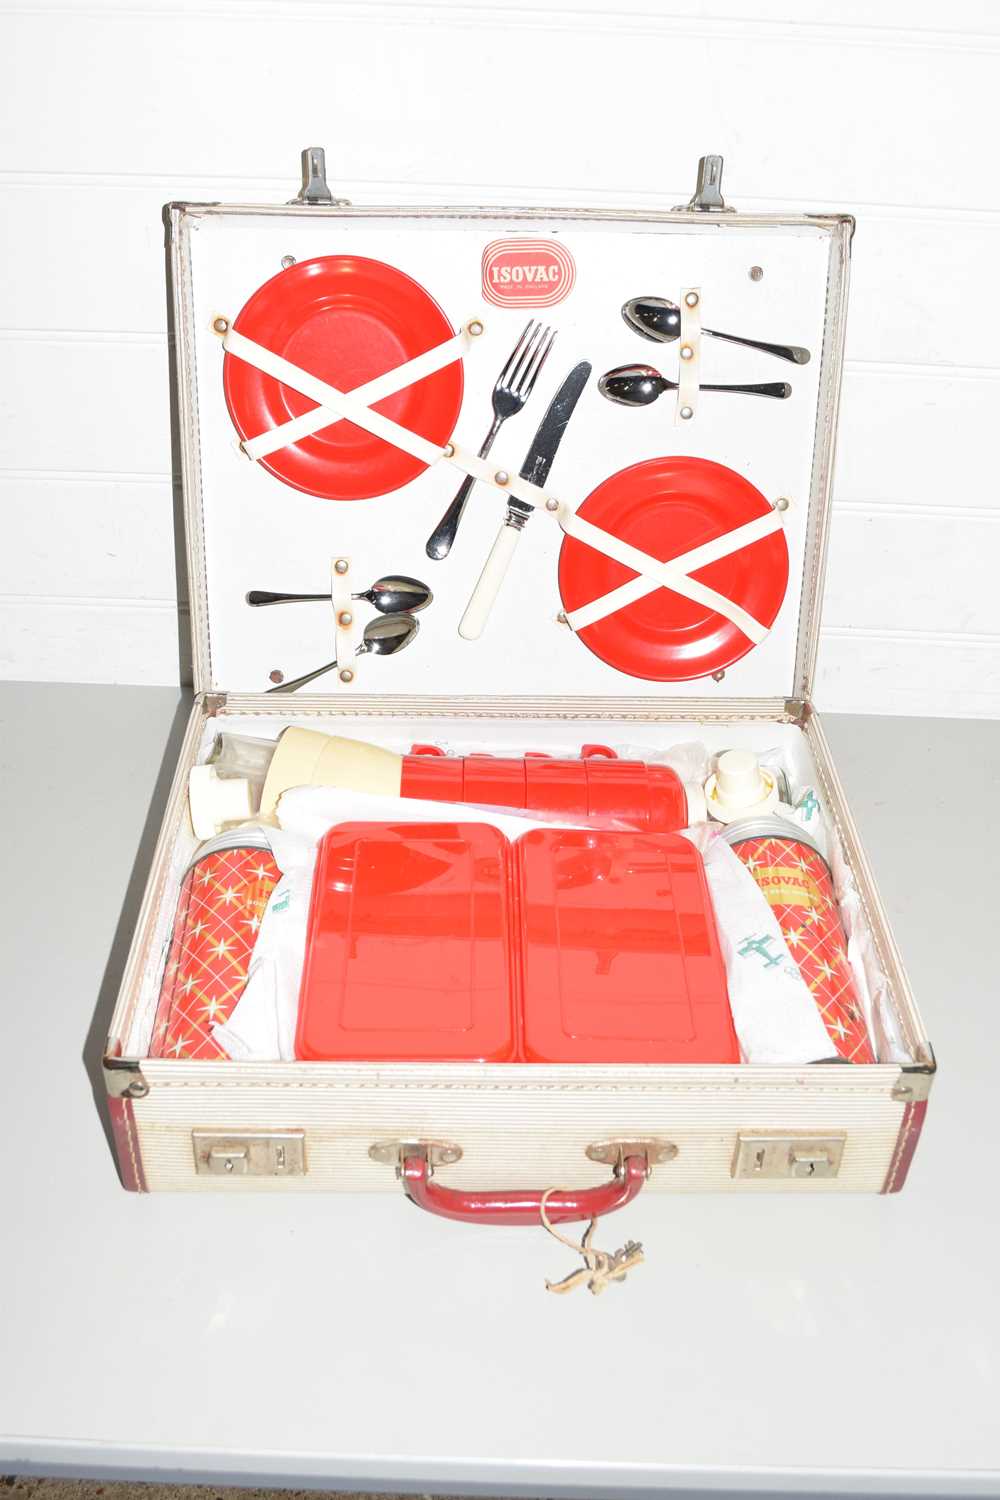 SUITCASE CONTAINING A PLASTIC PICNIC SET WITH THERMOS FLASKS - Image 2 of 2